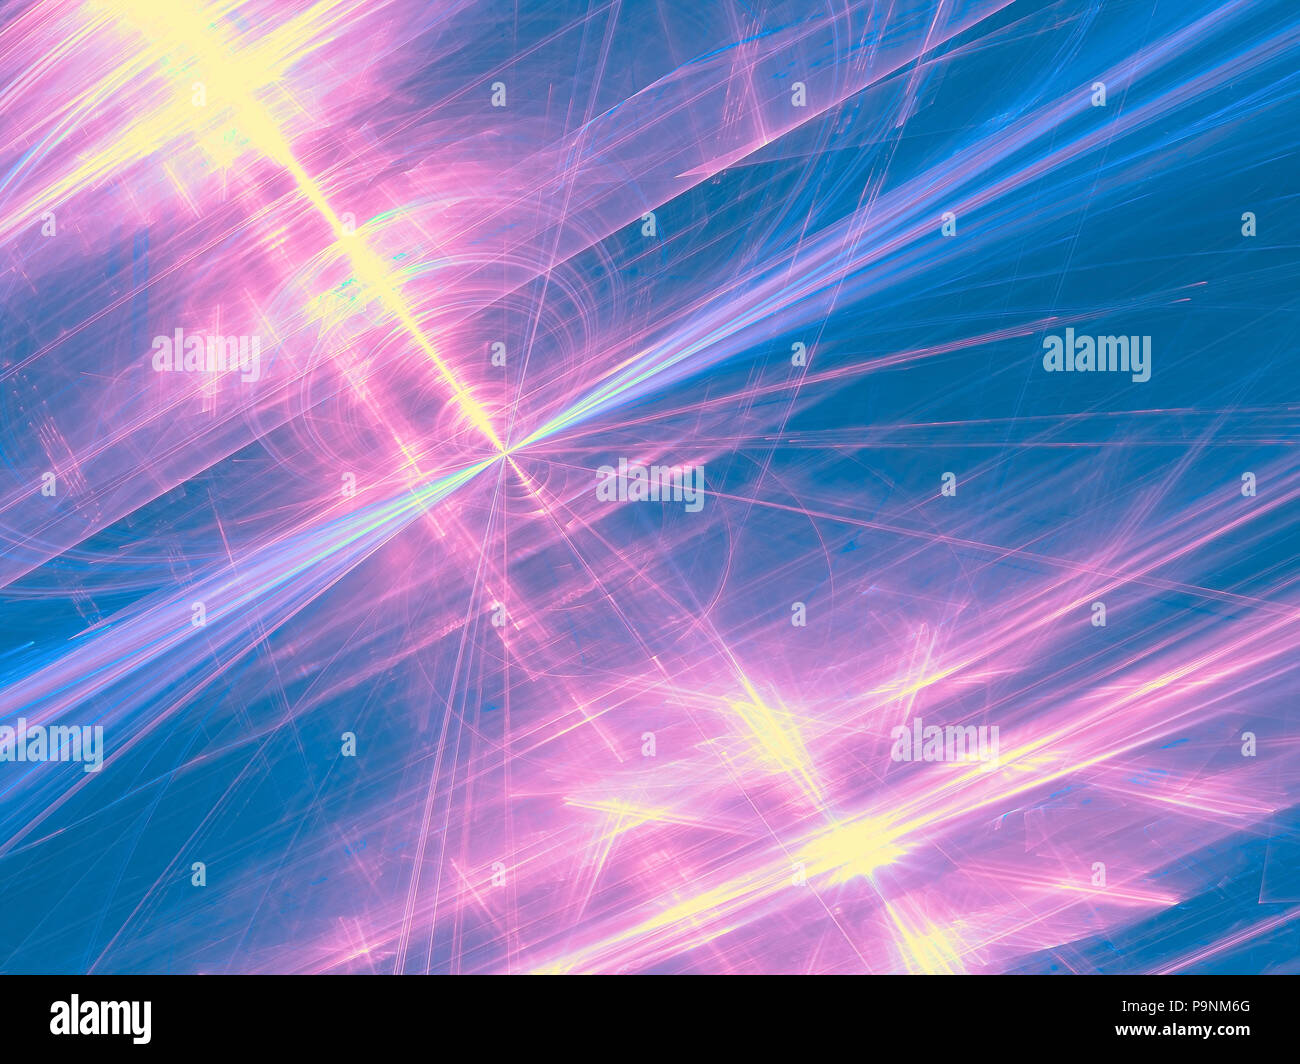 Glossy surface - abstract digitally generated image Stock Photo